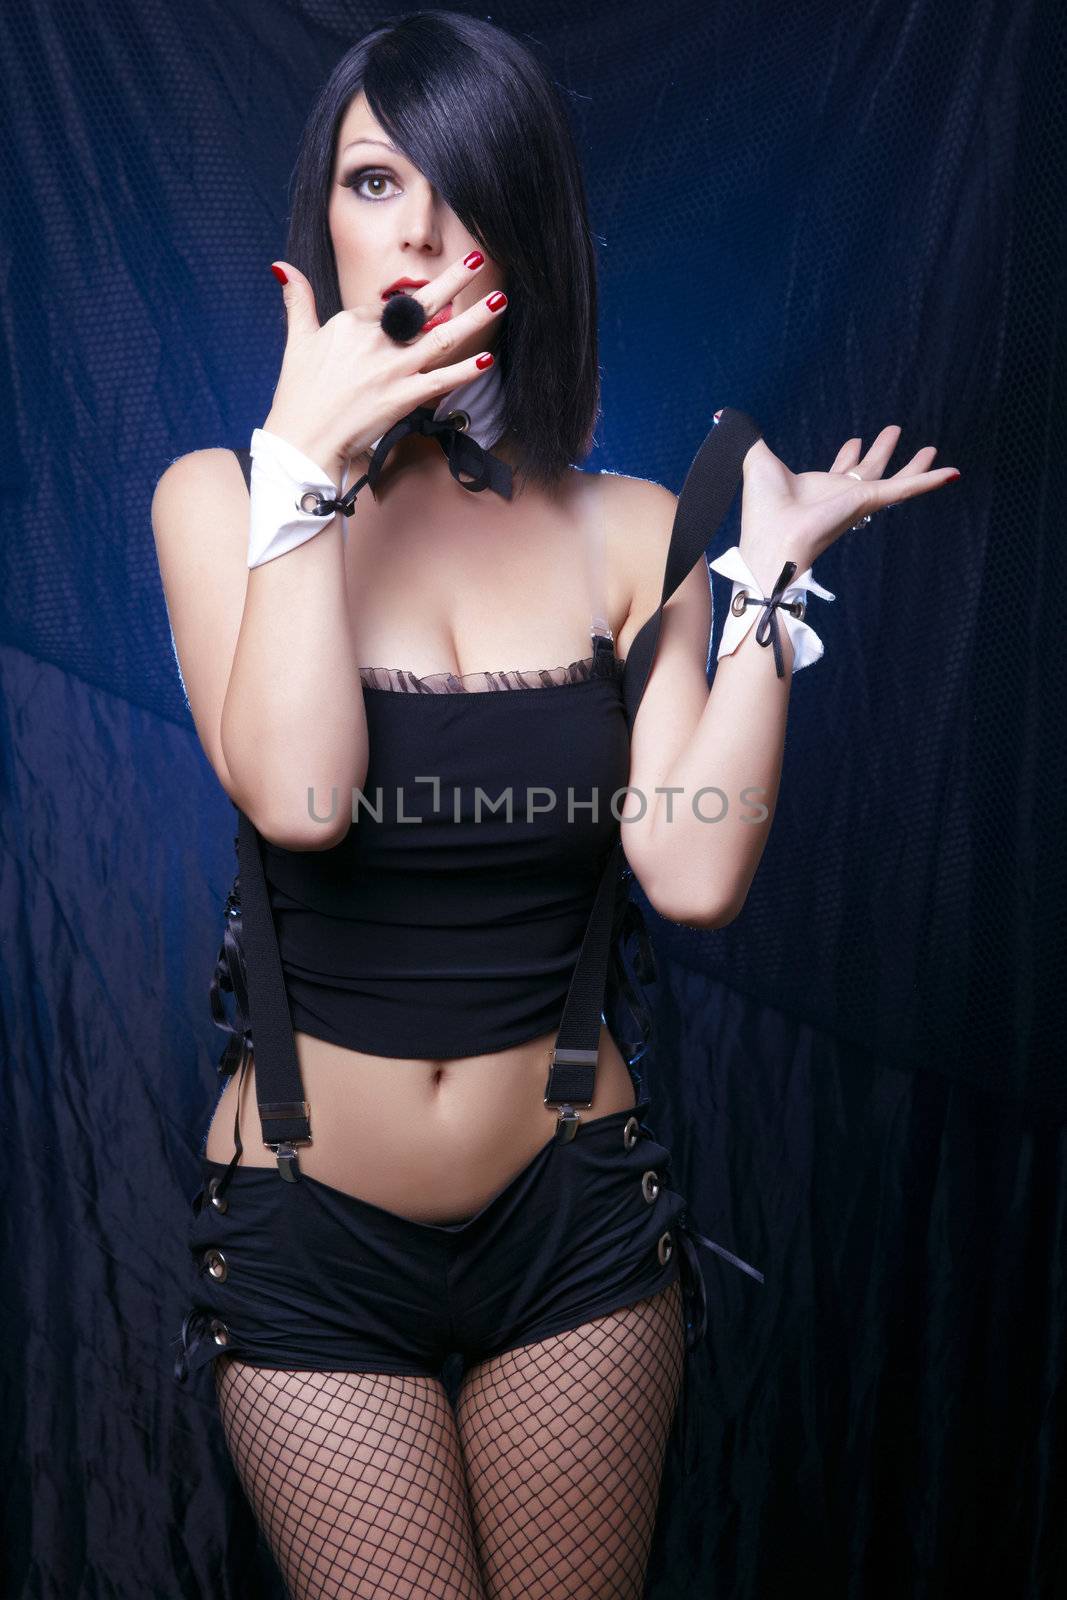 Cabaret Lady - Finger In Mouth by adamr